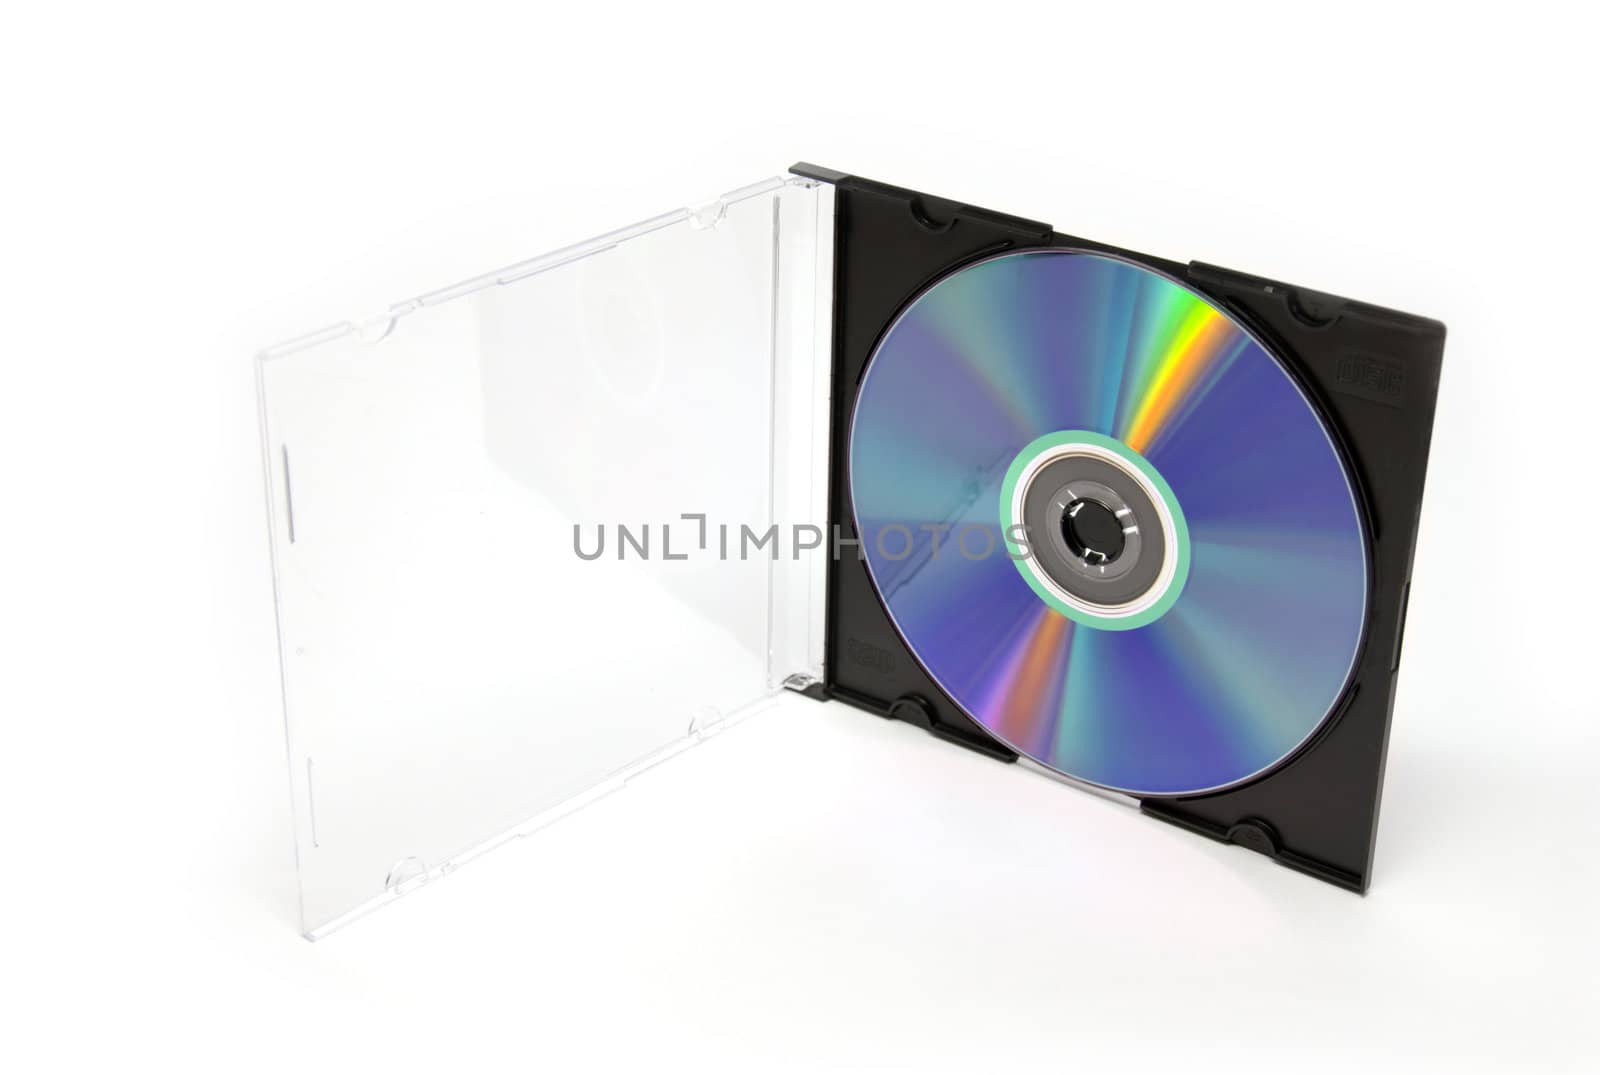 plate of the CD /DVD in the box slim on the white background by anki21